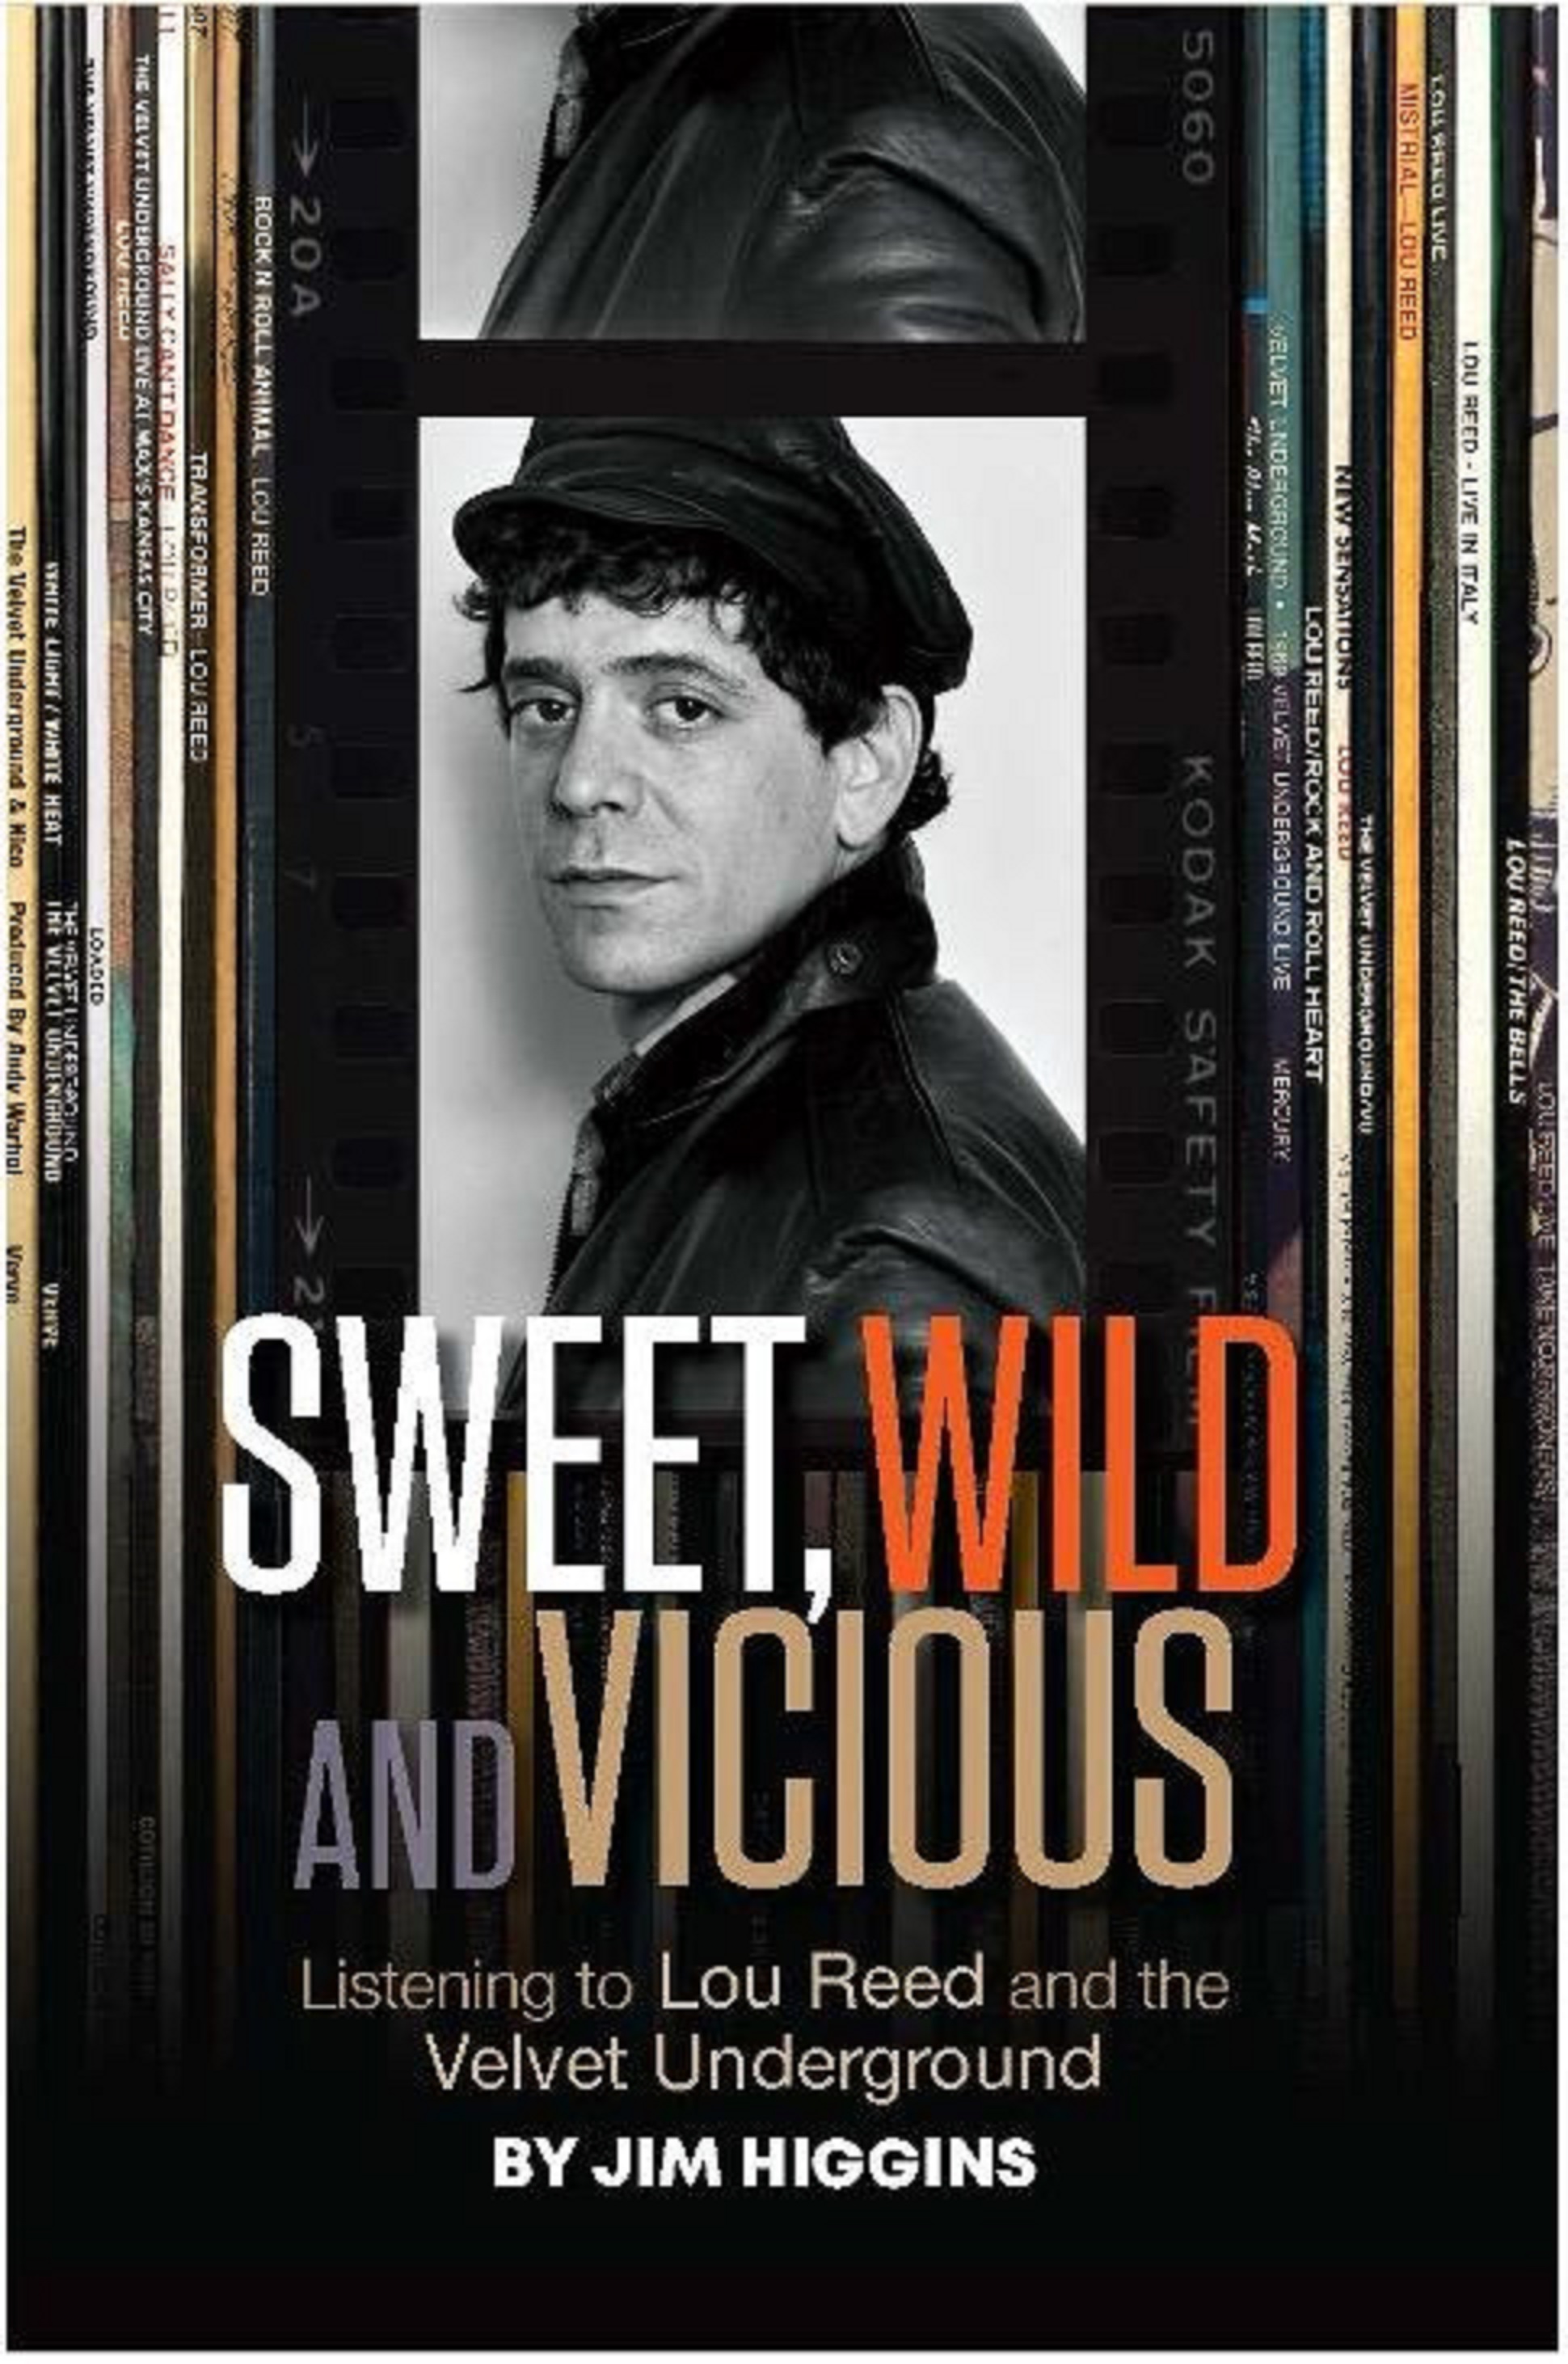 SWEET, WILD AND VICIOUS:  LISTENING TO LOU REED AND THE VELVET UNDERGROUND BY JIM HIGGINS